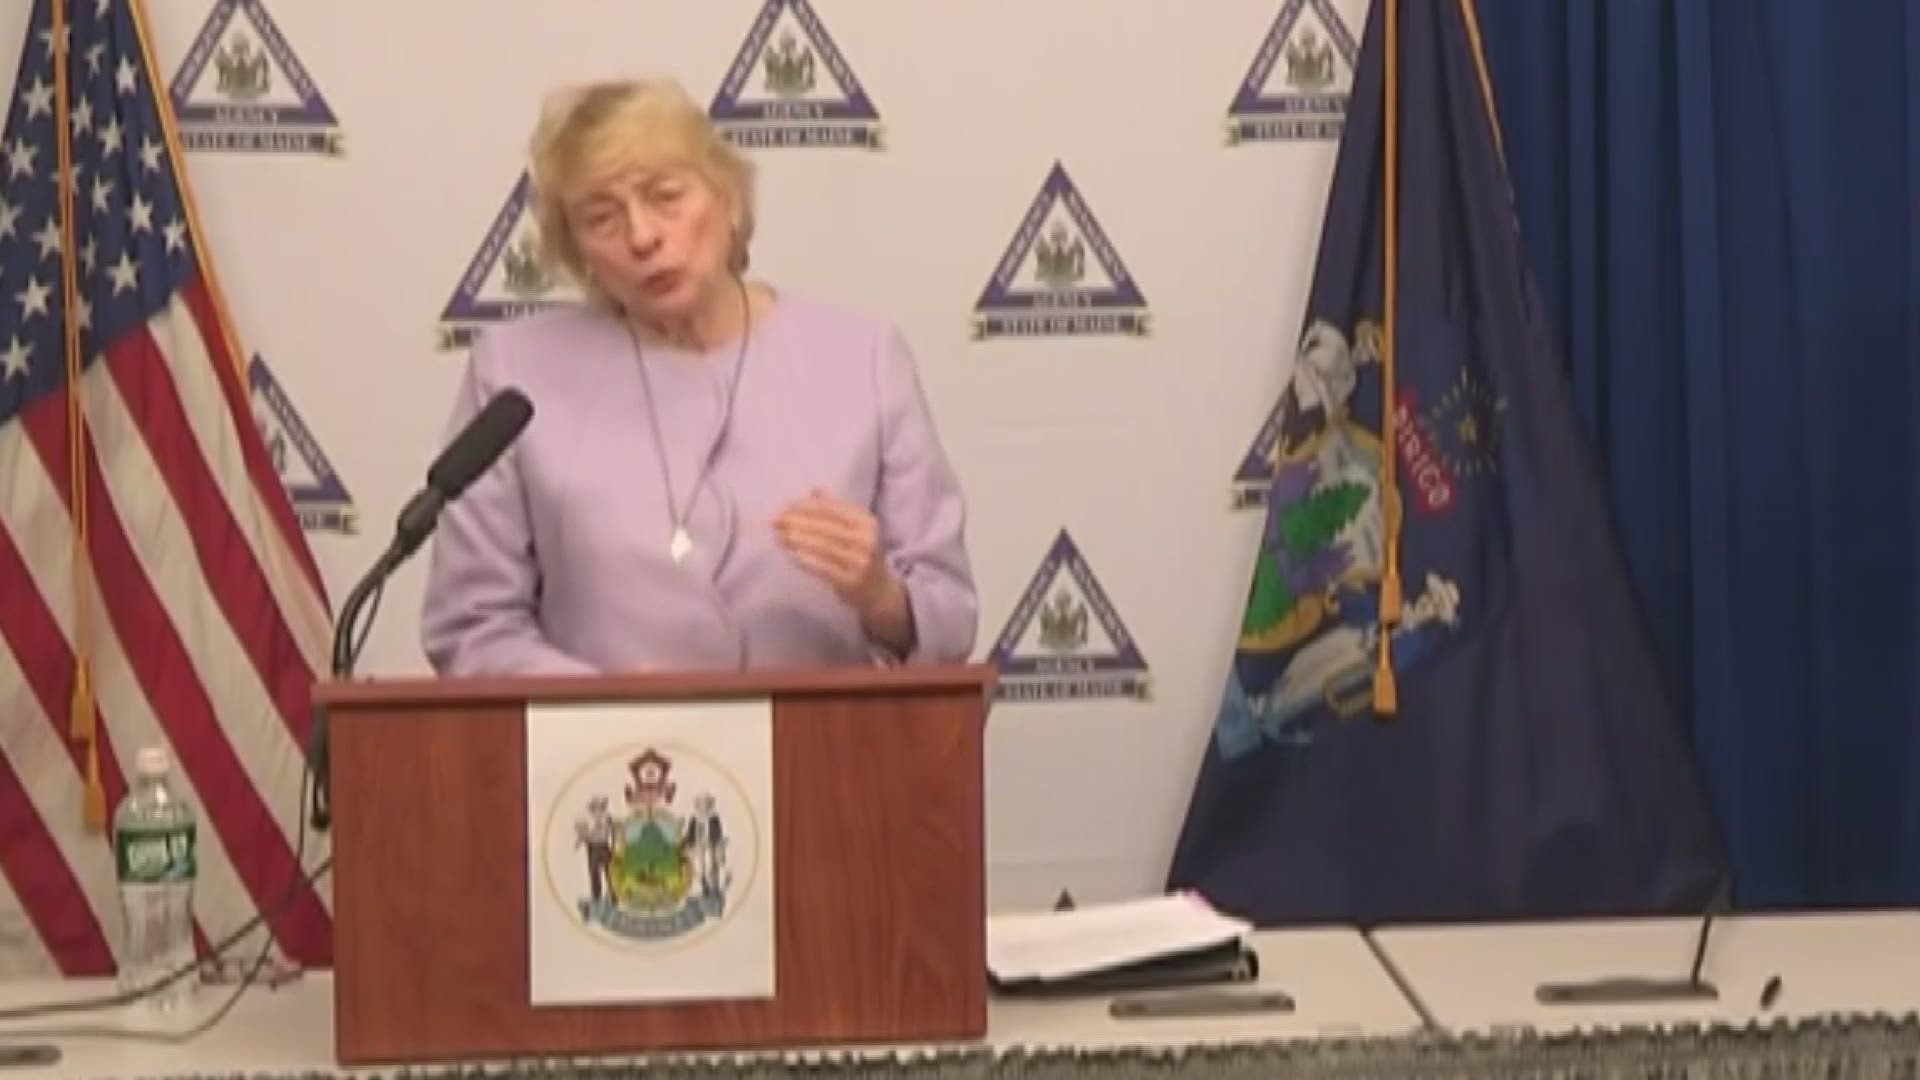 Maine Governor Janet Mills restricts personal travel and extends school closures through April 1 due to the coronavirus, COVID-19 spread